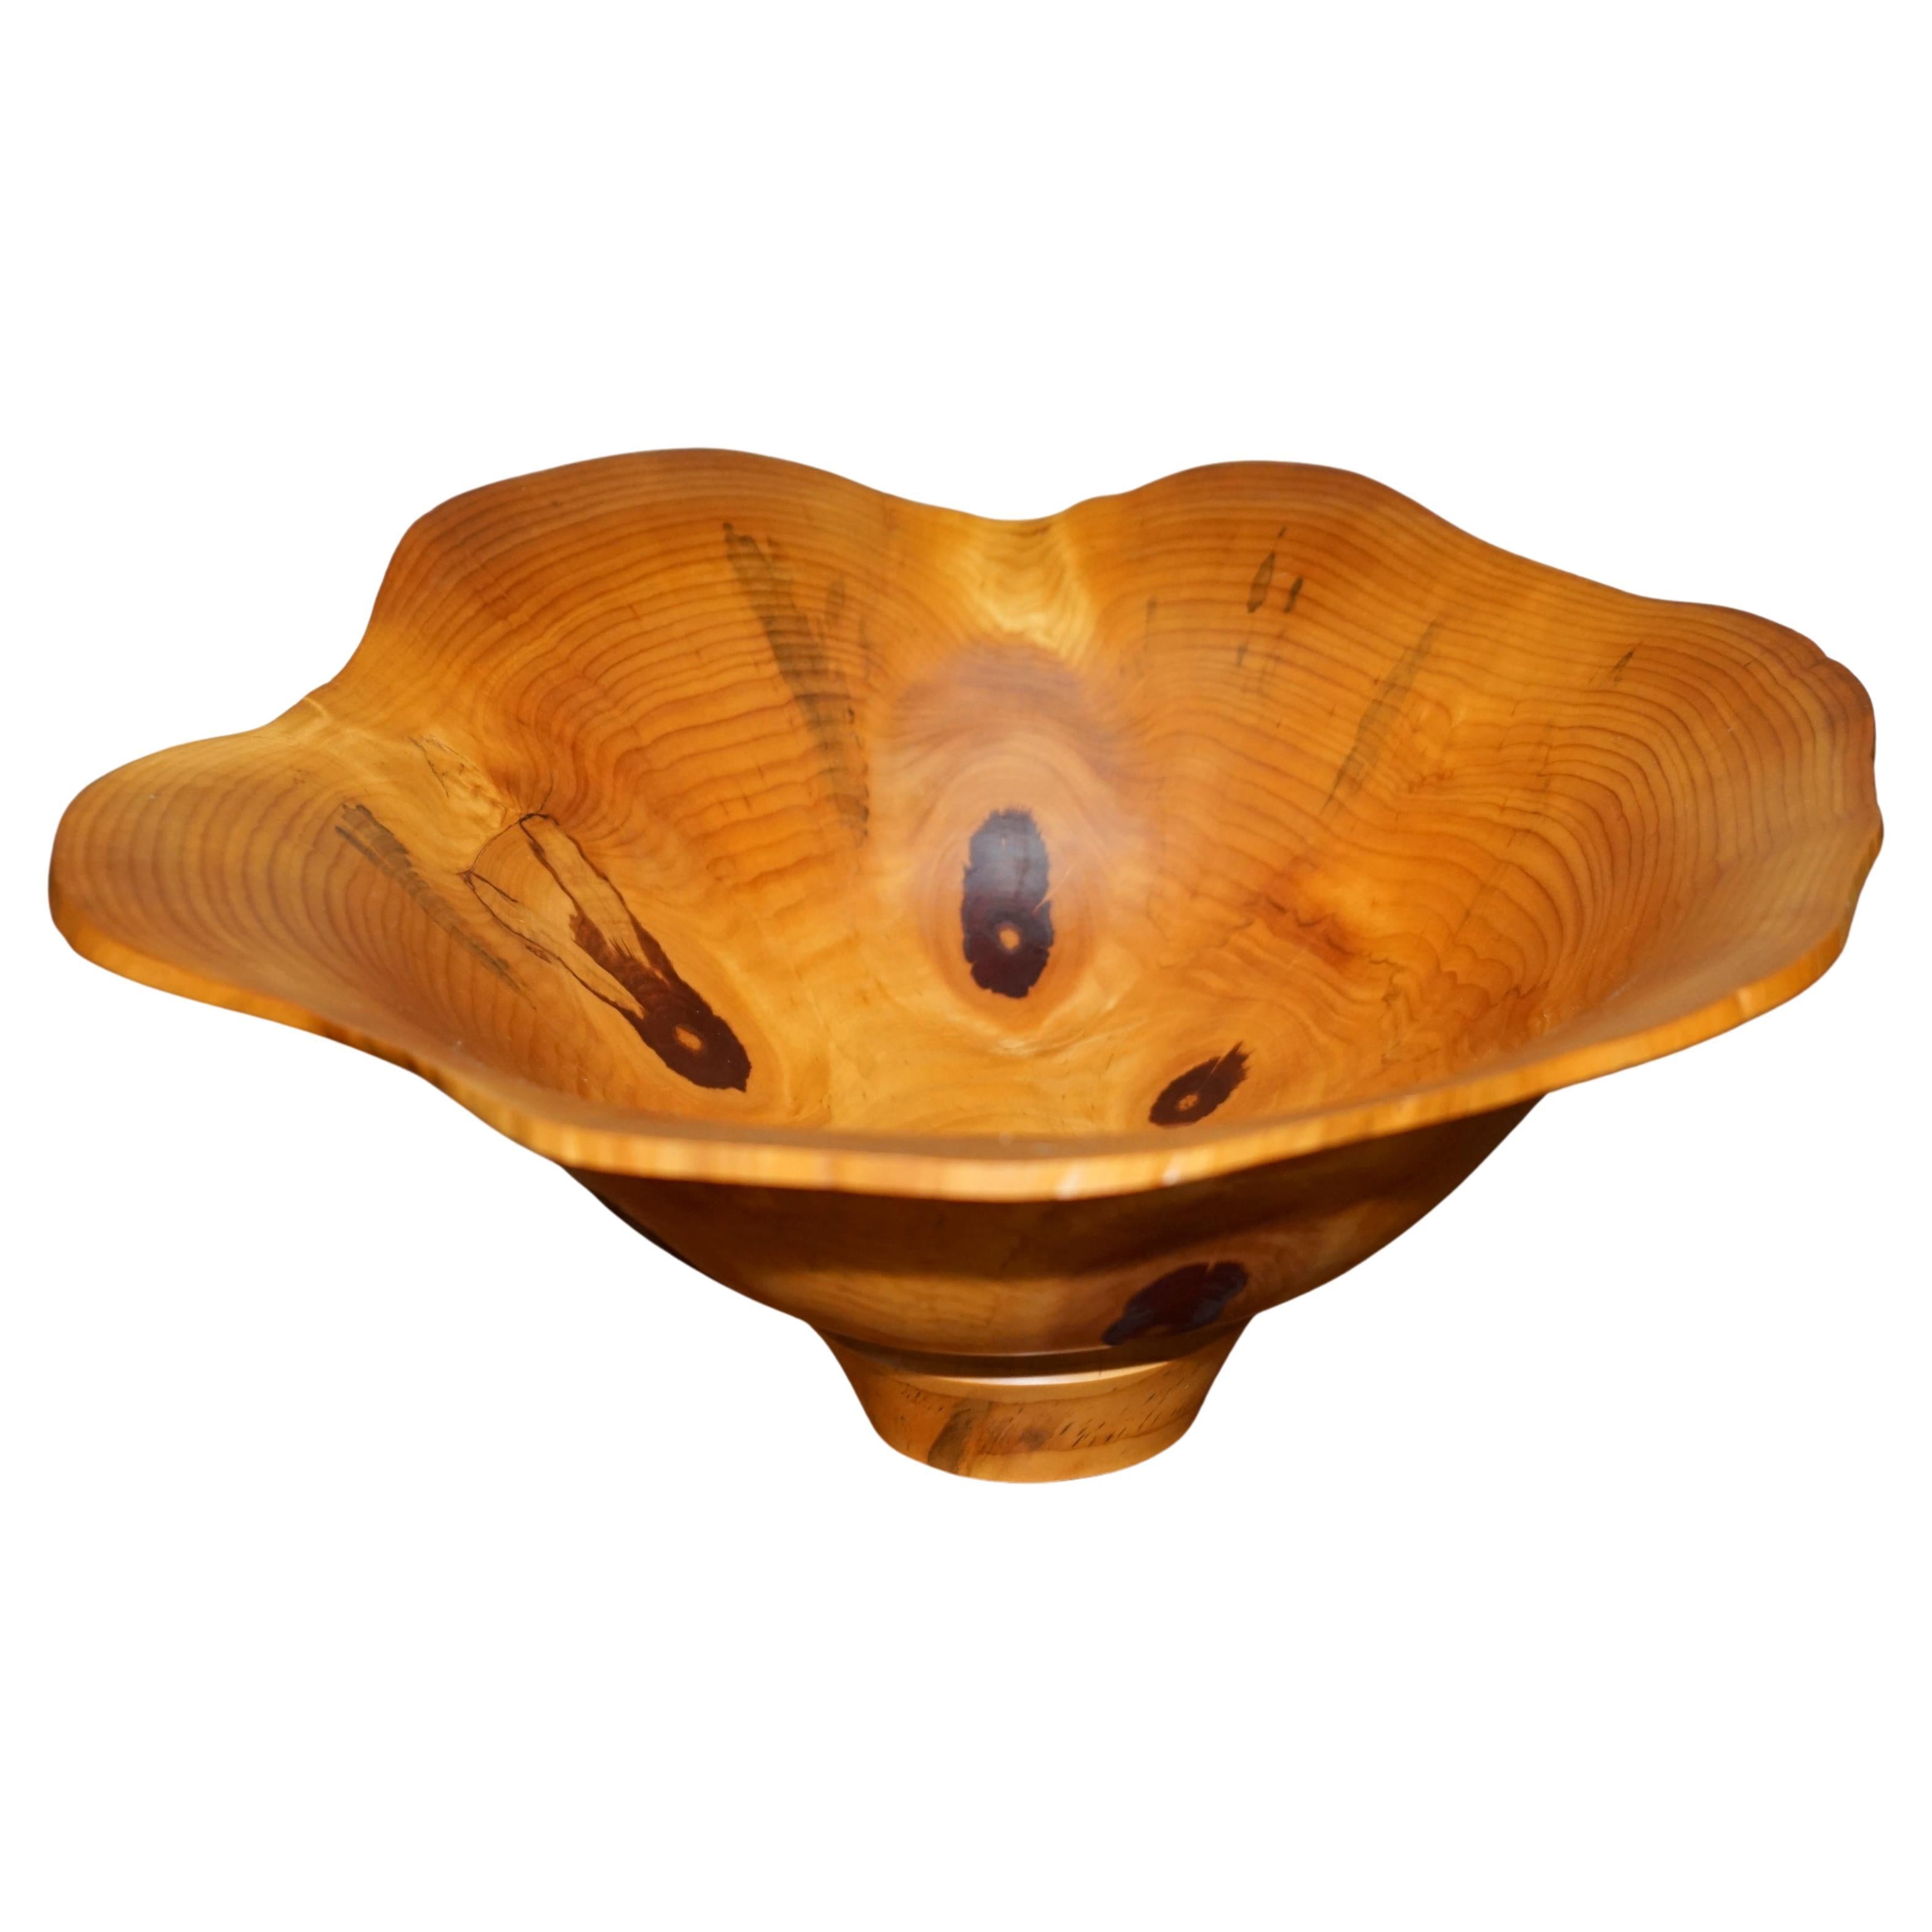 Royal House Antiques

Royal House Antiques is delighted to offer for sale this absolutely sublime large Monkey Puzzle also known as Araucaria Araucana bowl which has been signed to the base GJM for Gregory Jervis Moreton which was made in 2005

What